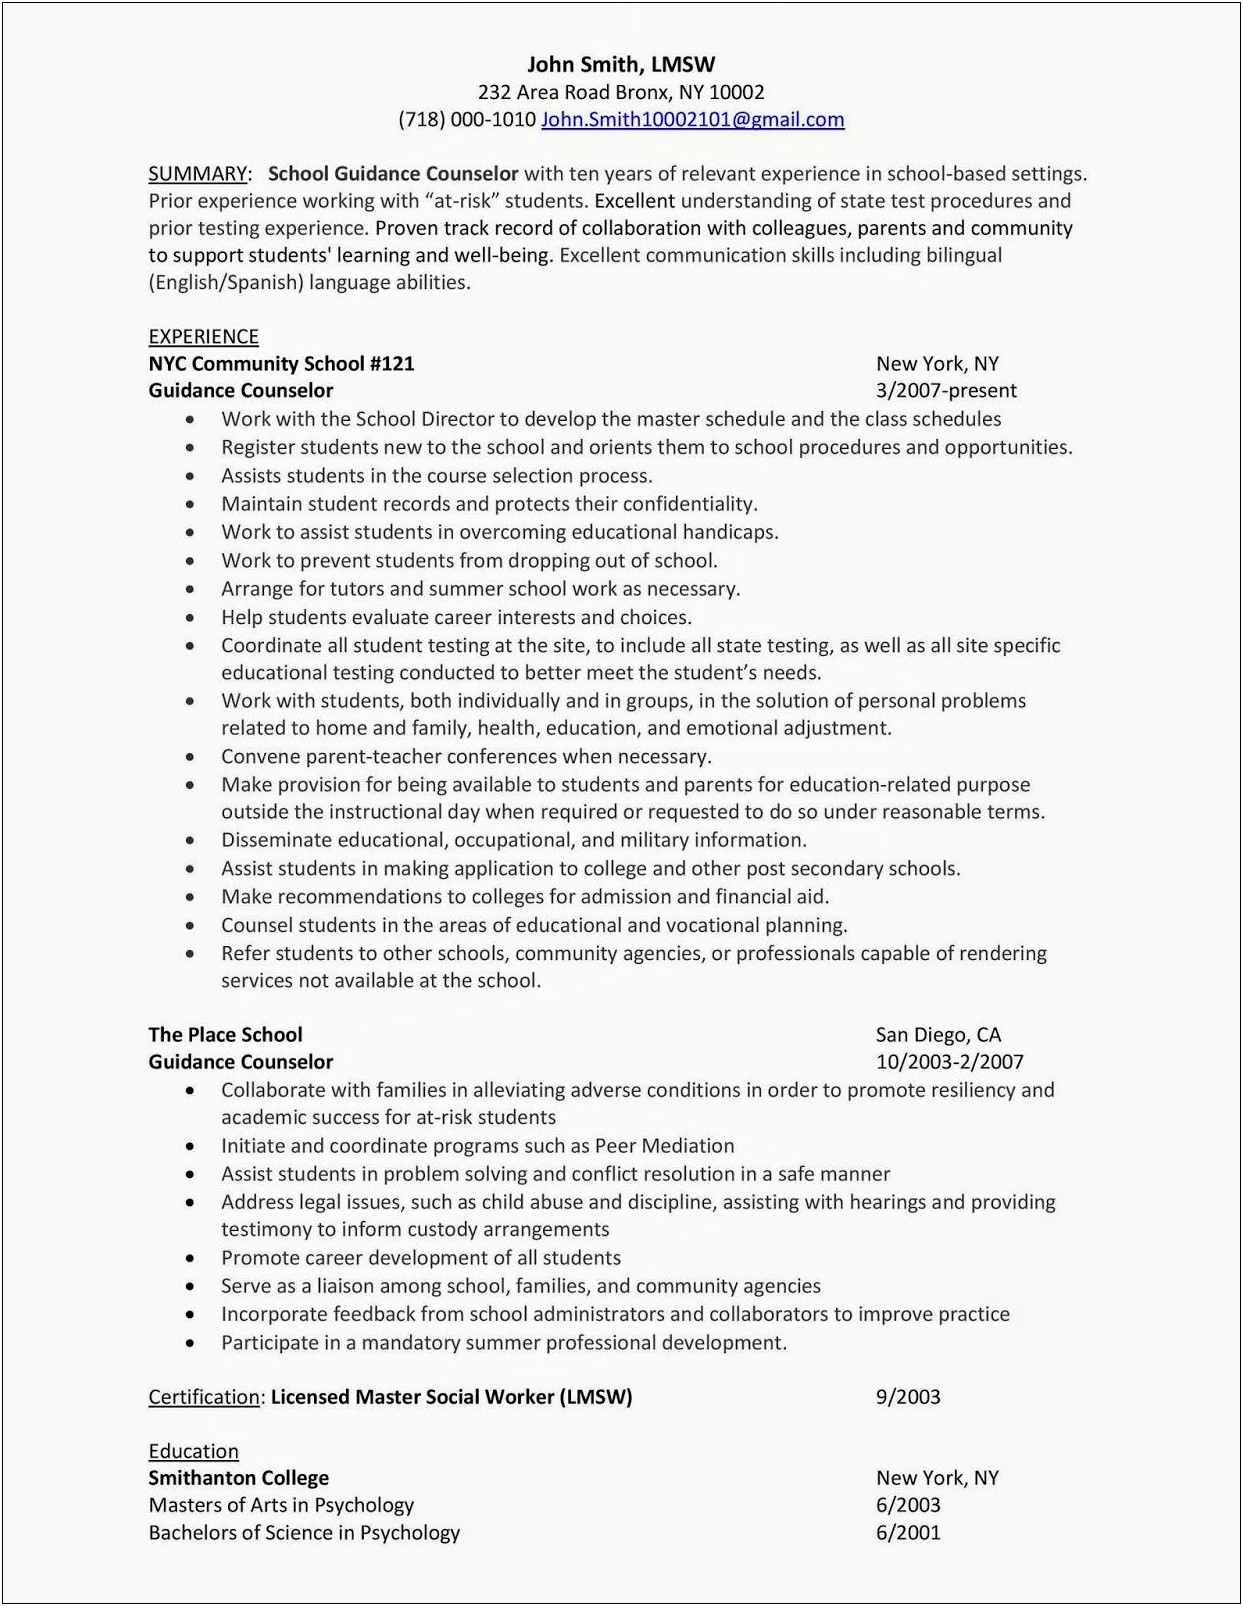 Sample Resume For Professional Counselor